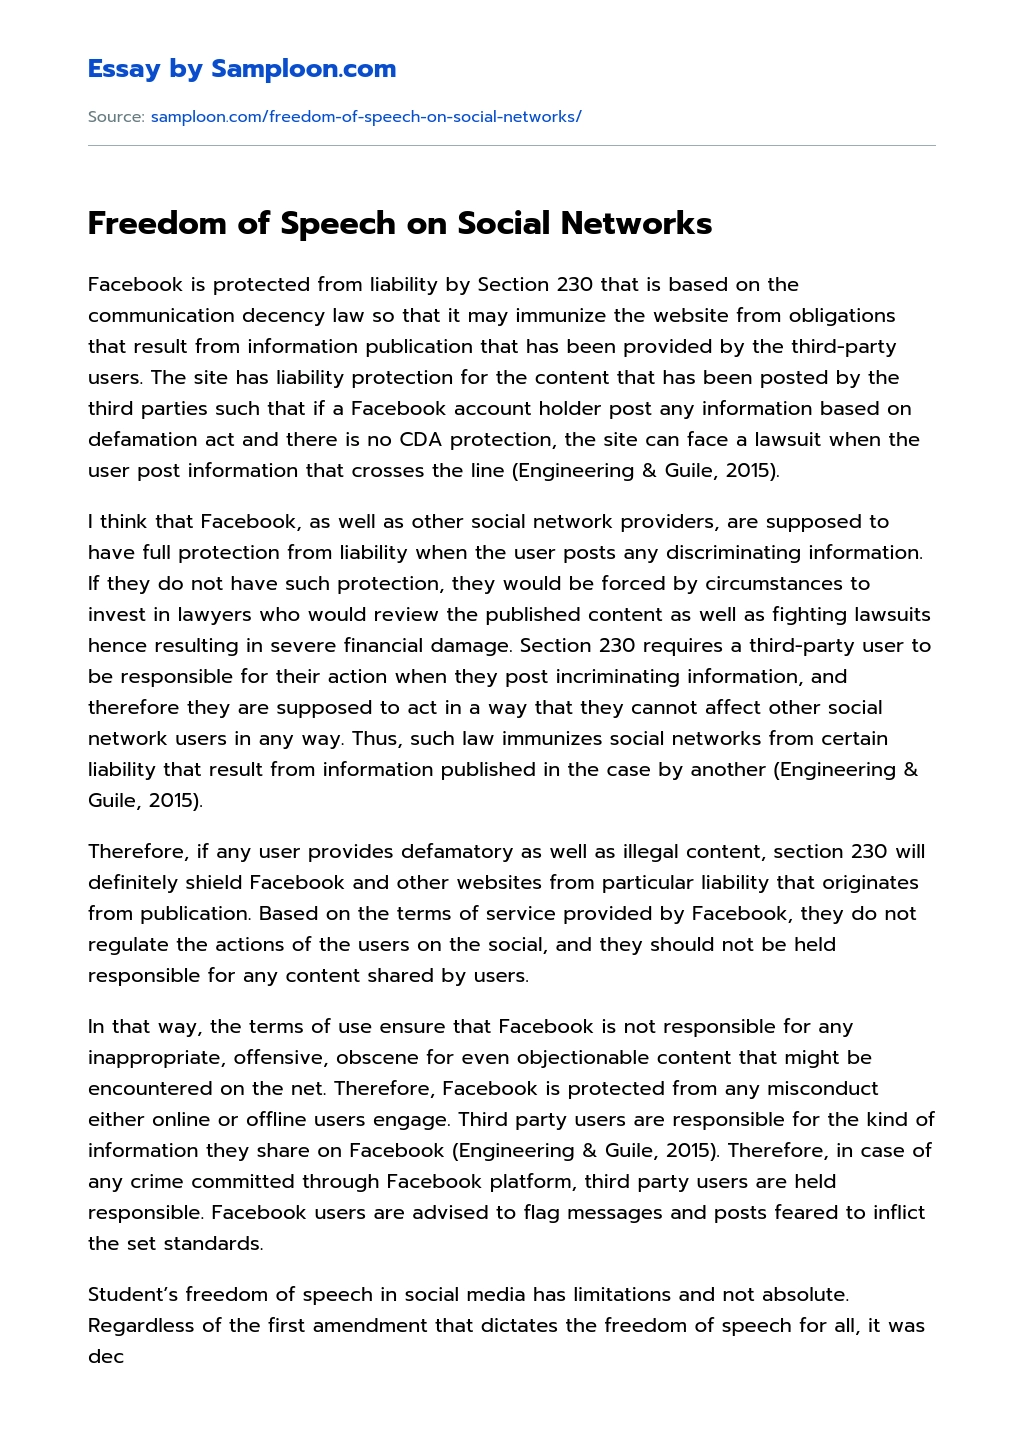 Freedom of Speech on Social Networks Review essay